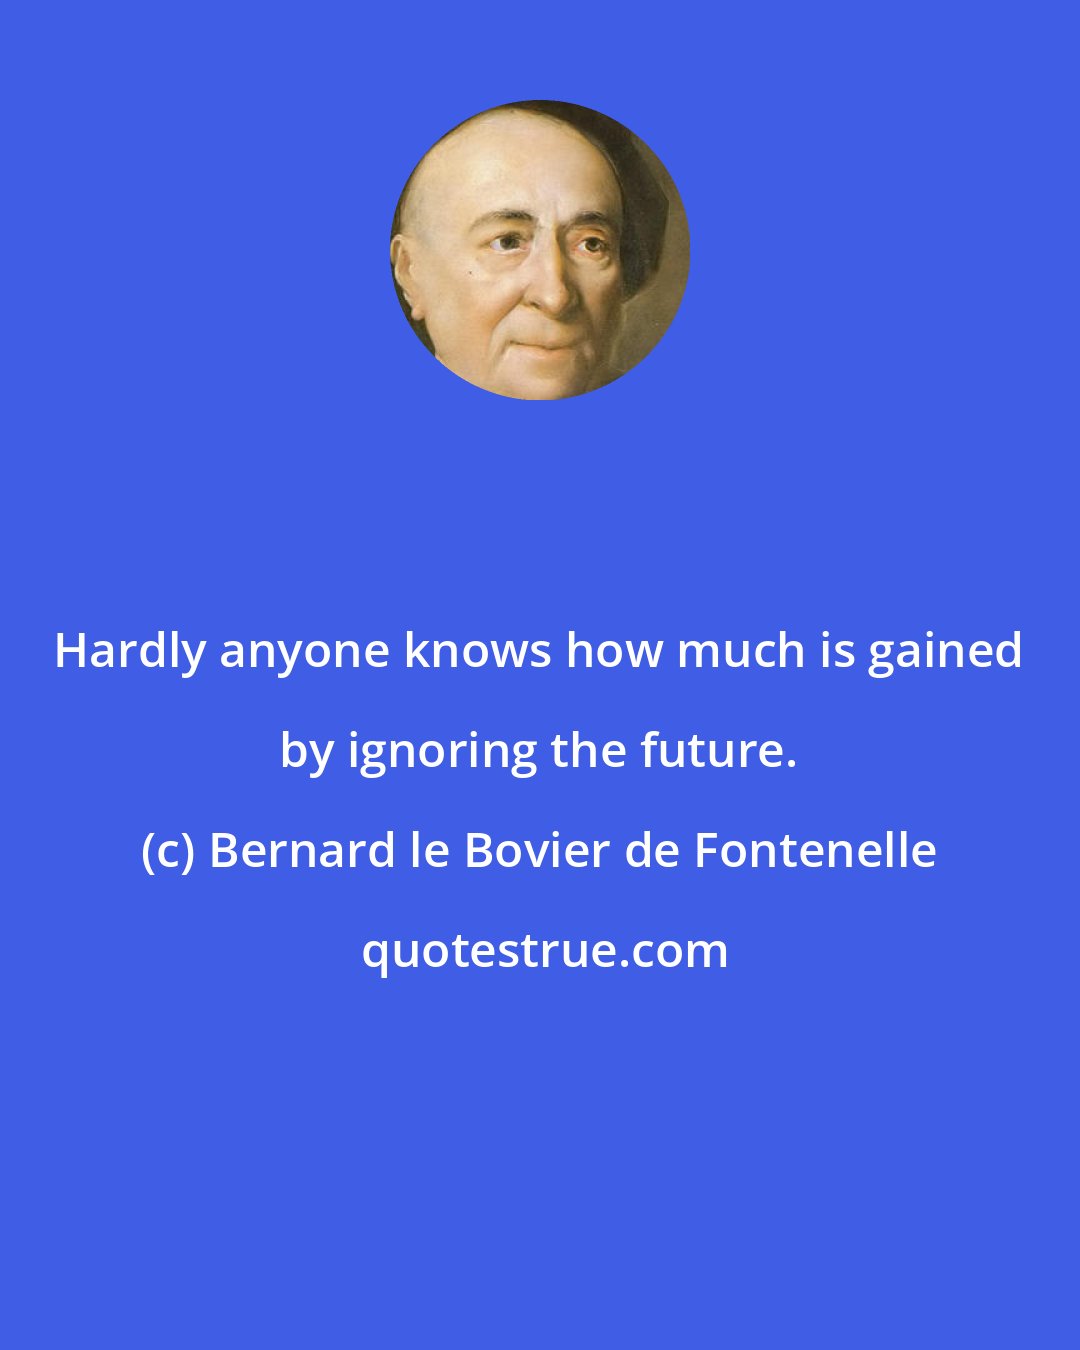 Bernard le Bovier de Fontenelle: Hardly anyone knows how much is gained by ignoring the future.